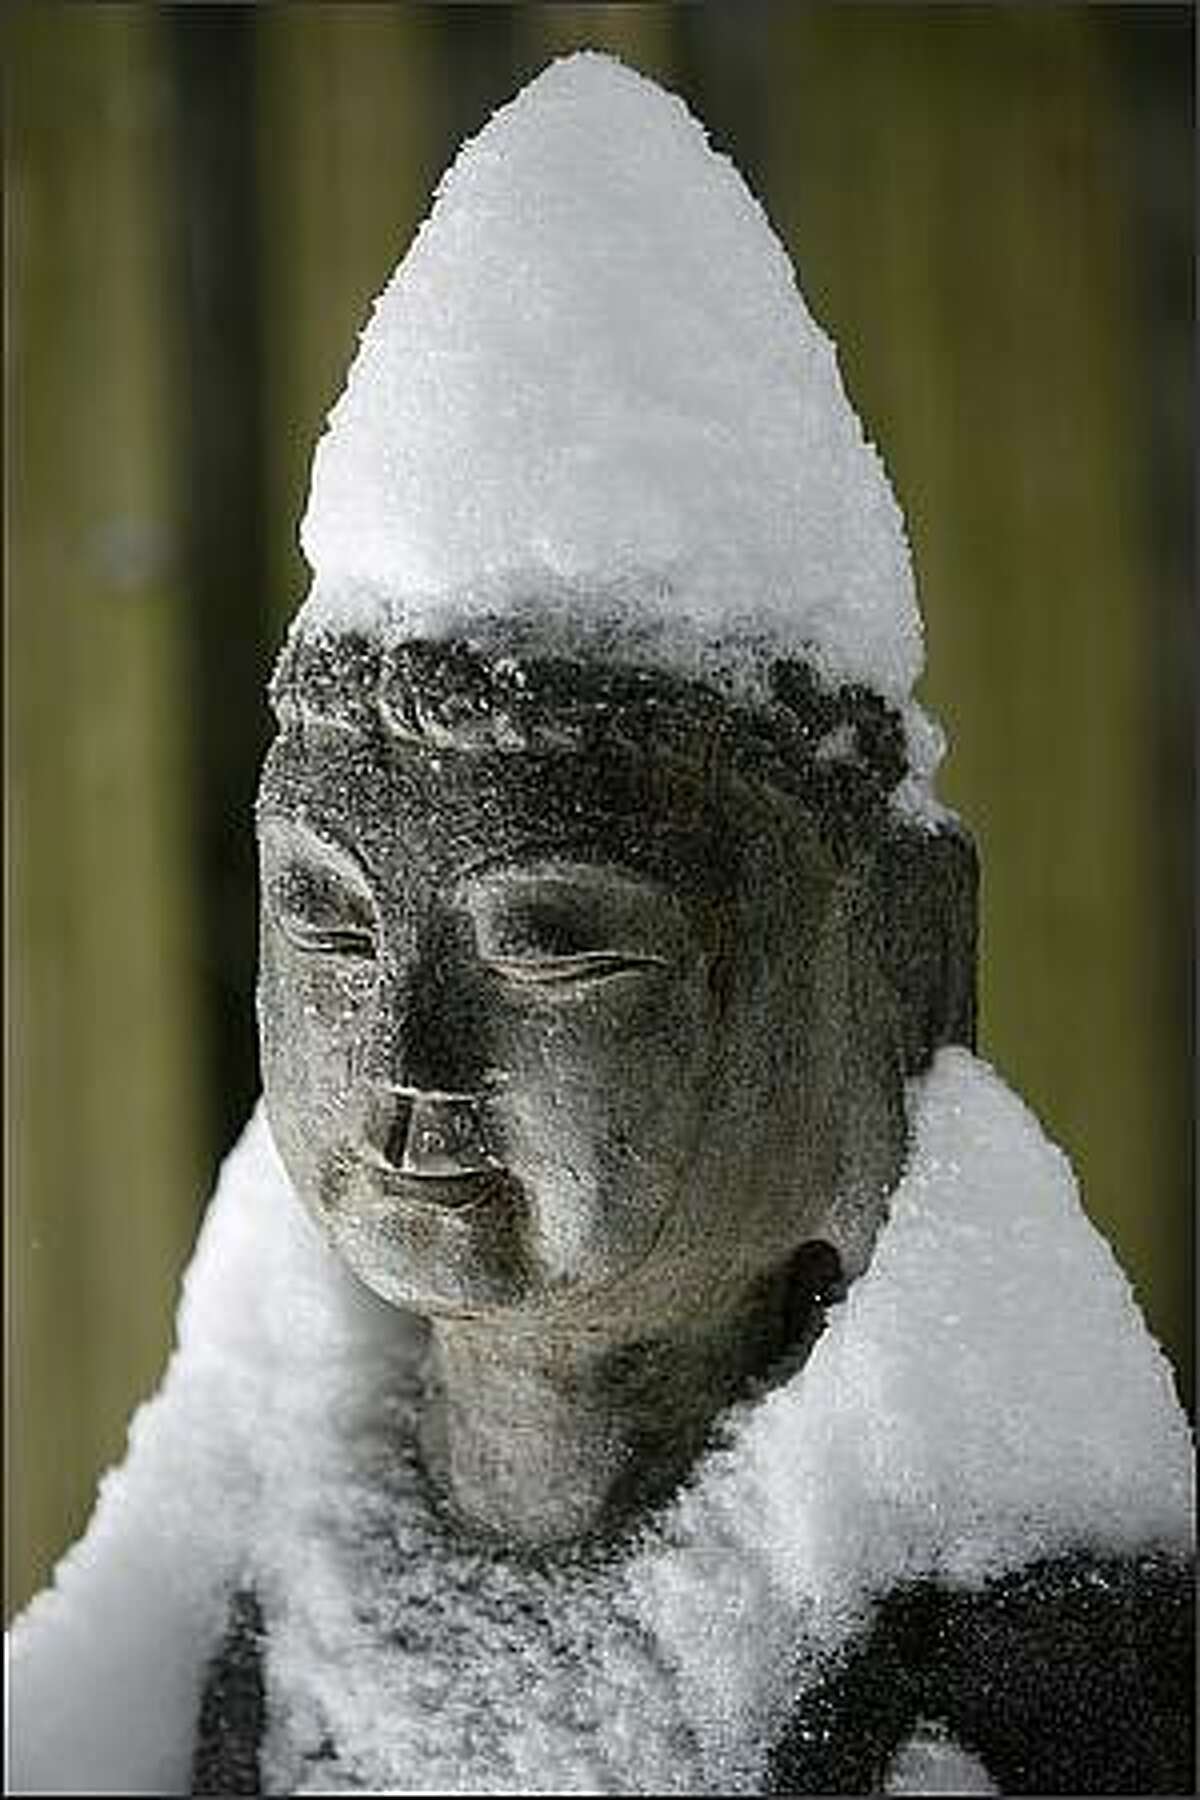 Looking a bit like St. Nick, a carved stone Buddha sports a conical cap and cloak of snow at Mike Urban's home on Vashon Island.